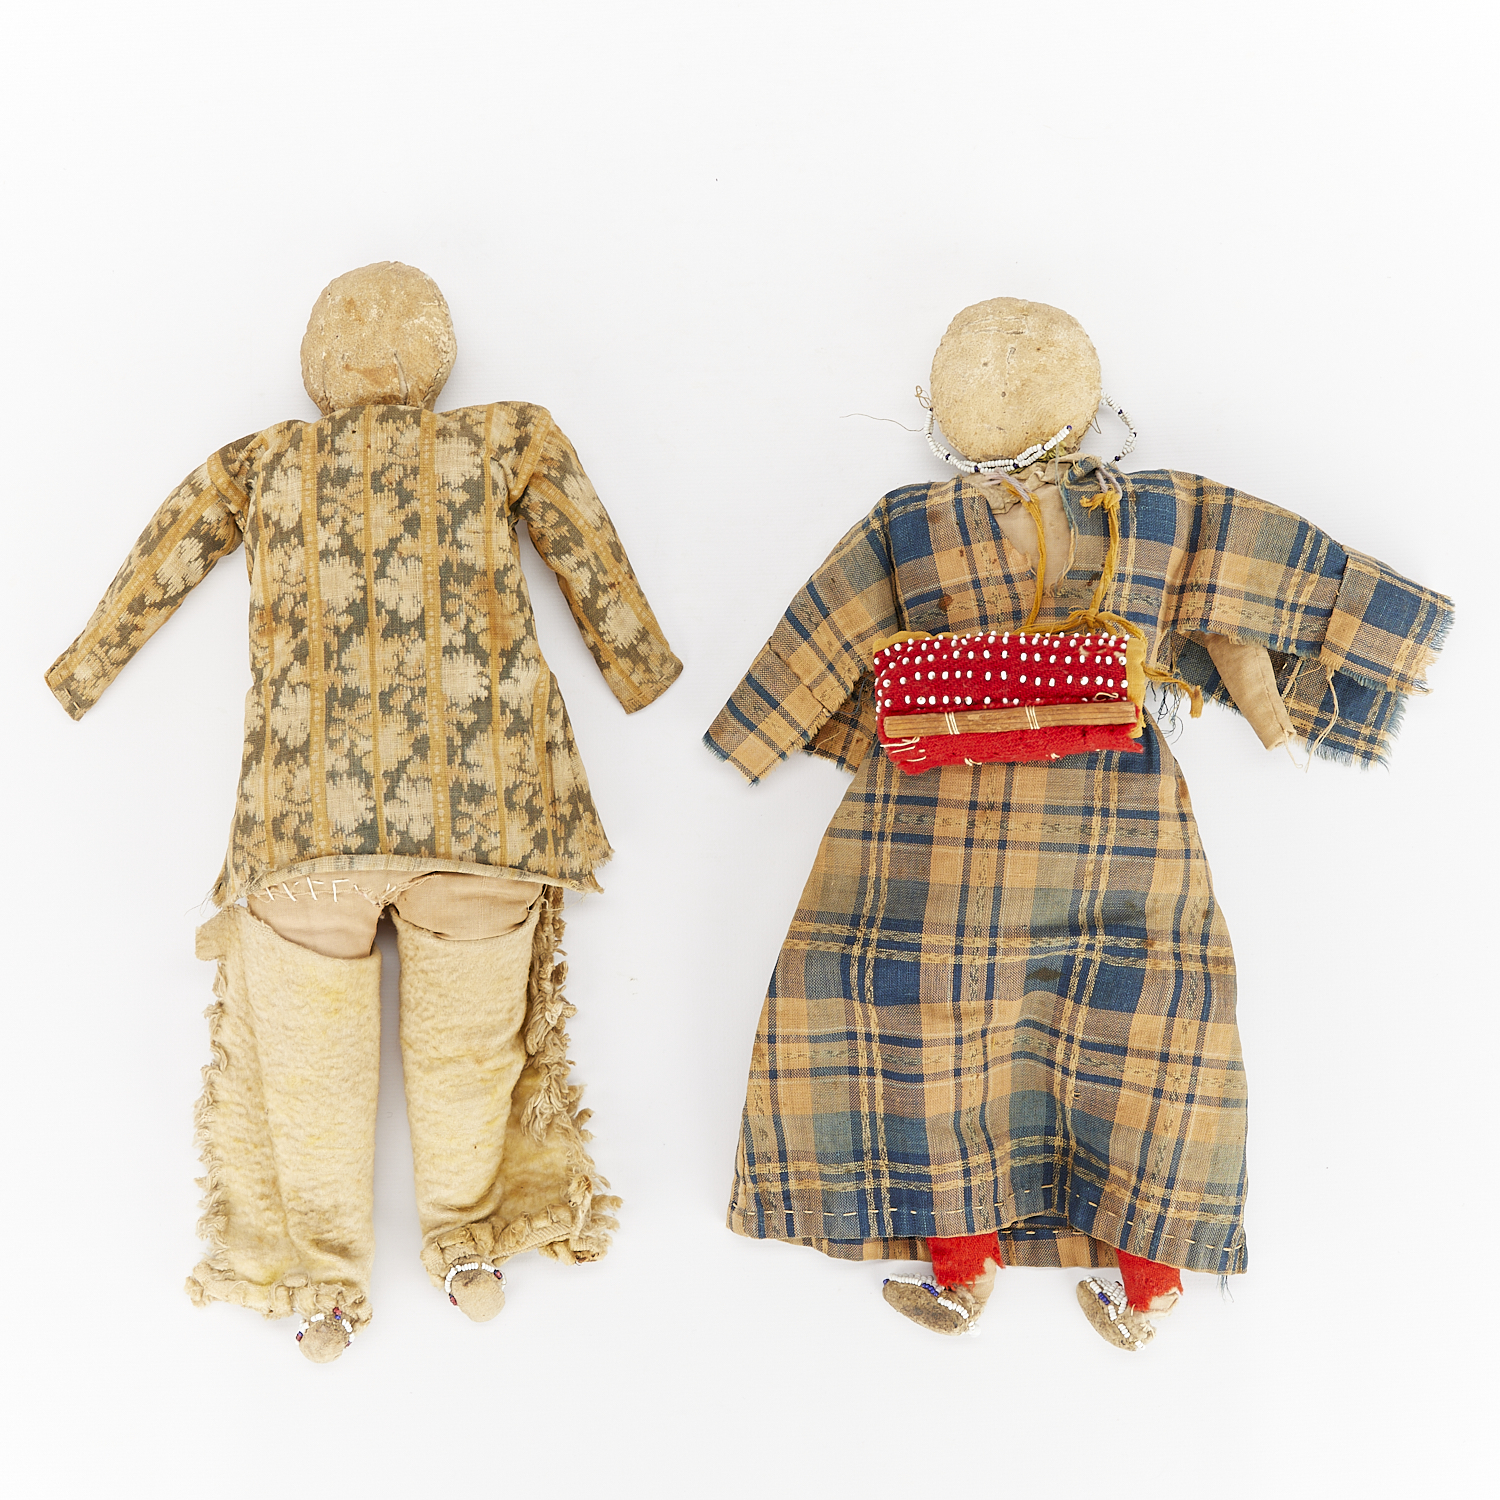 Group of 2 Native American Dolls with Beading - Image 3 of 9